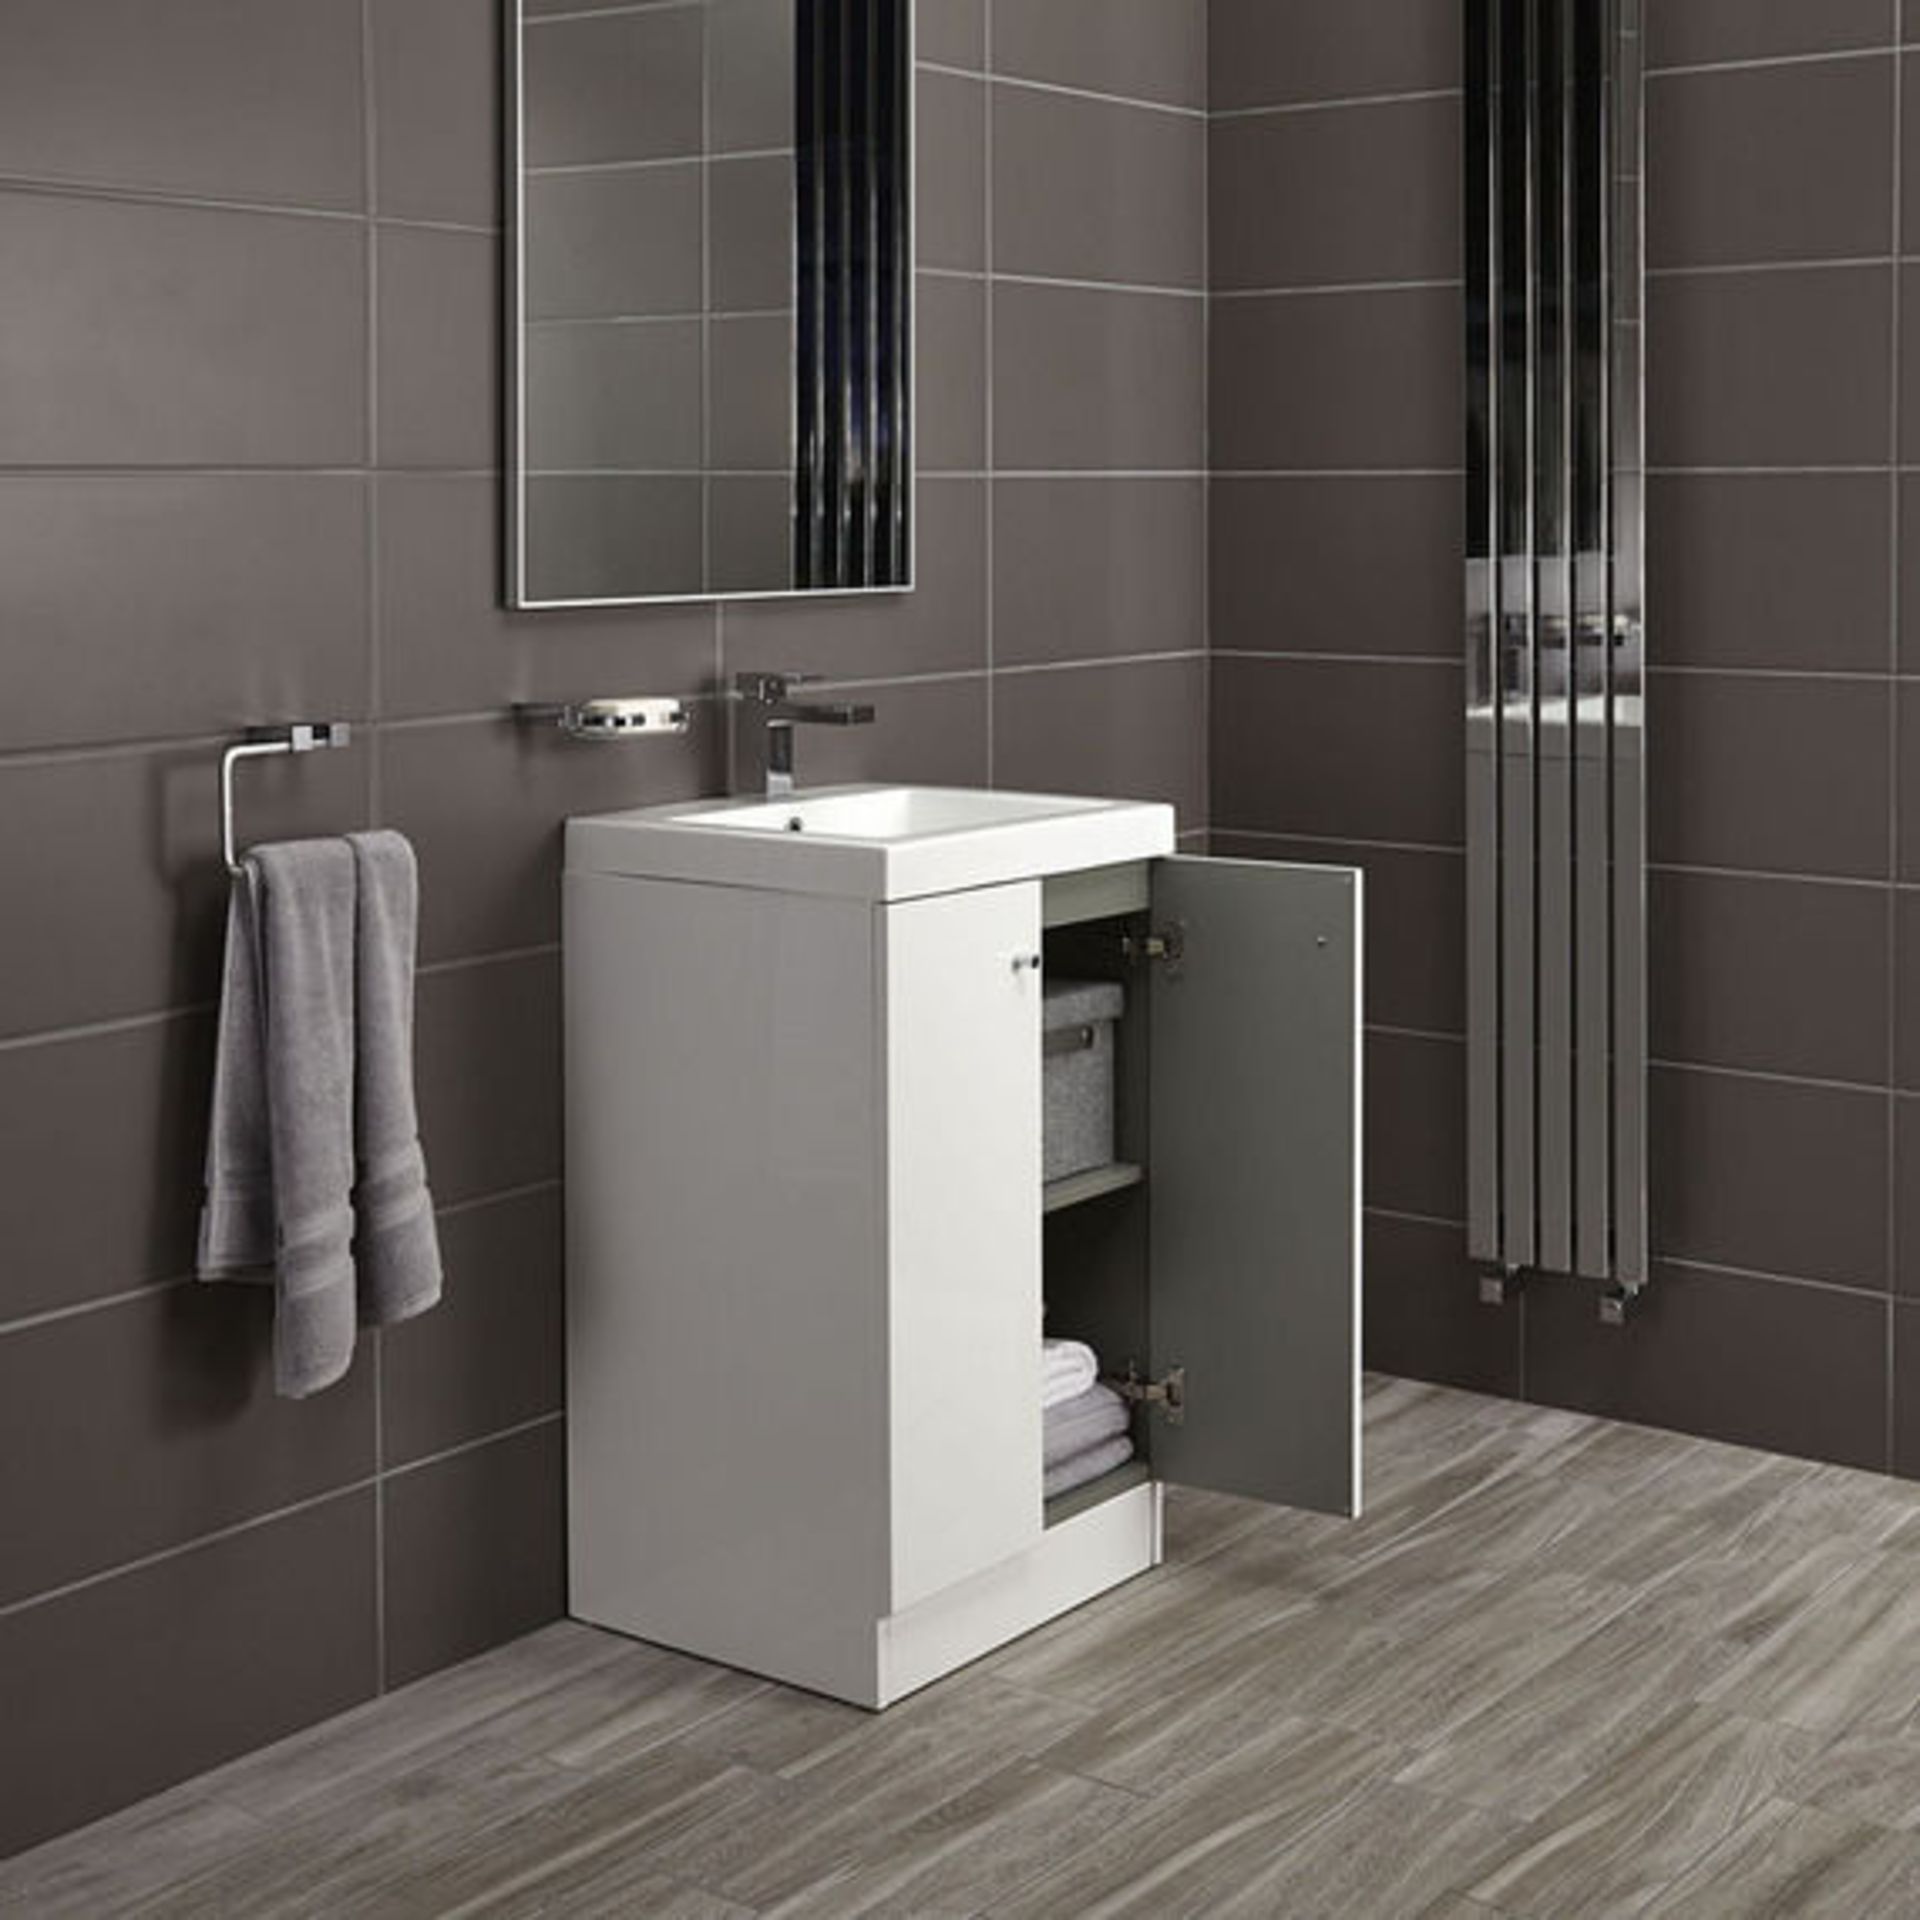 10 x Alpine Duo 500 Floor Standing Vanity unit - Gloss White - Brand New Boxed Stock - Dimensions: - Image 2 of 5